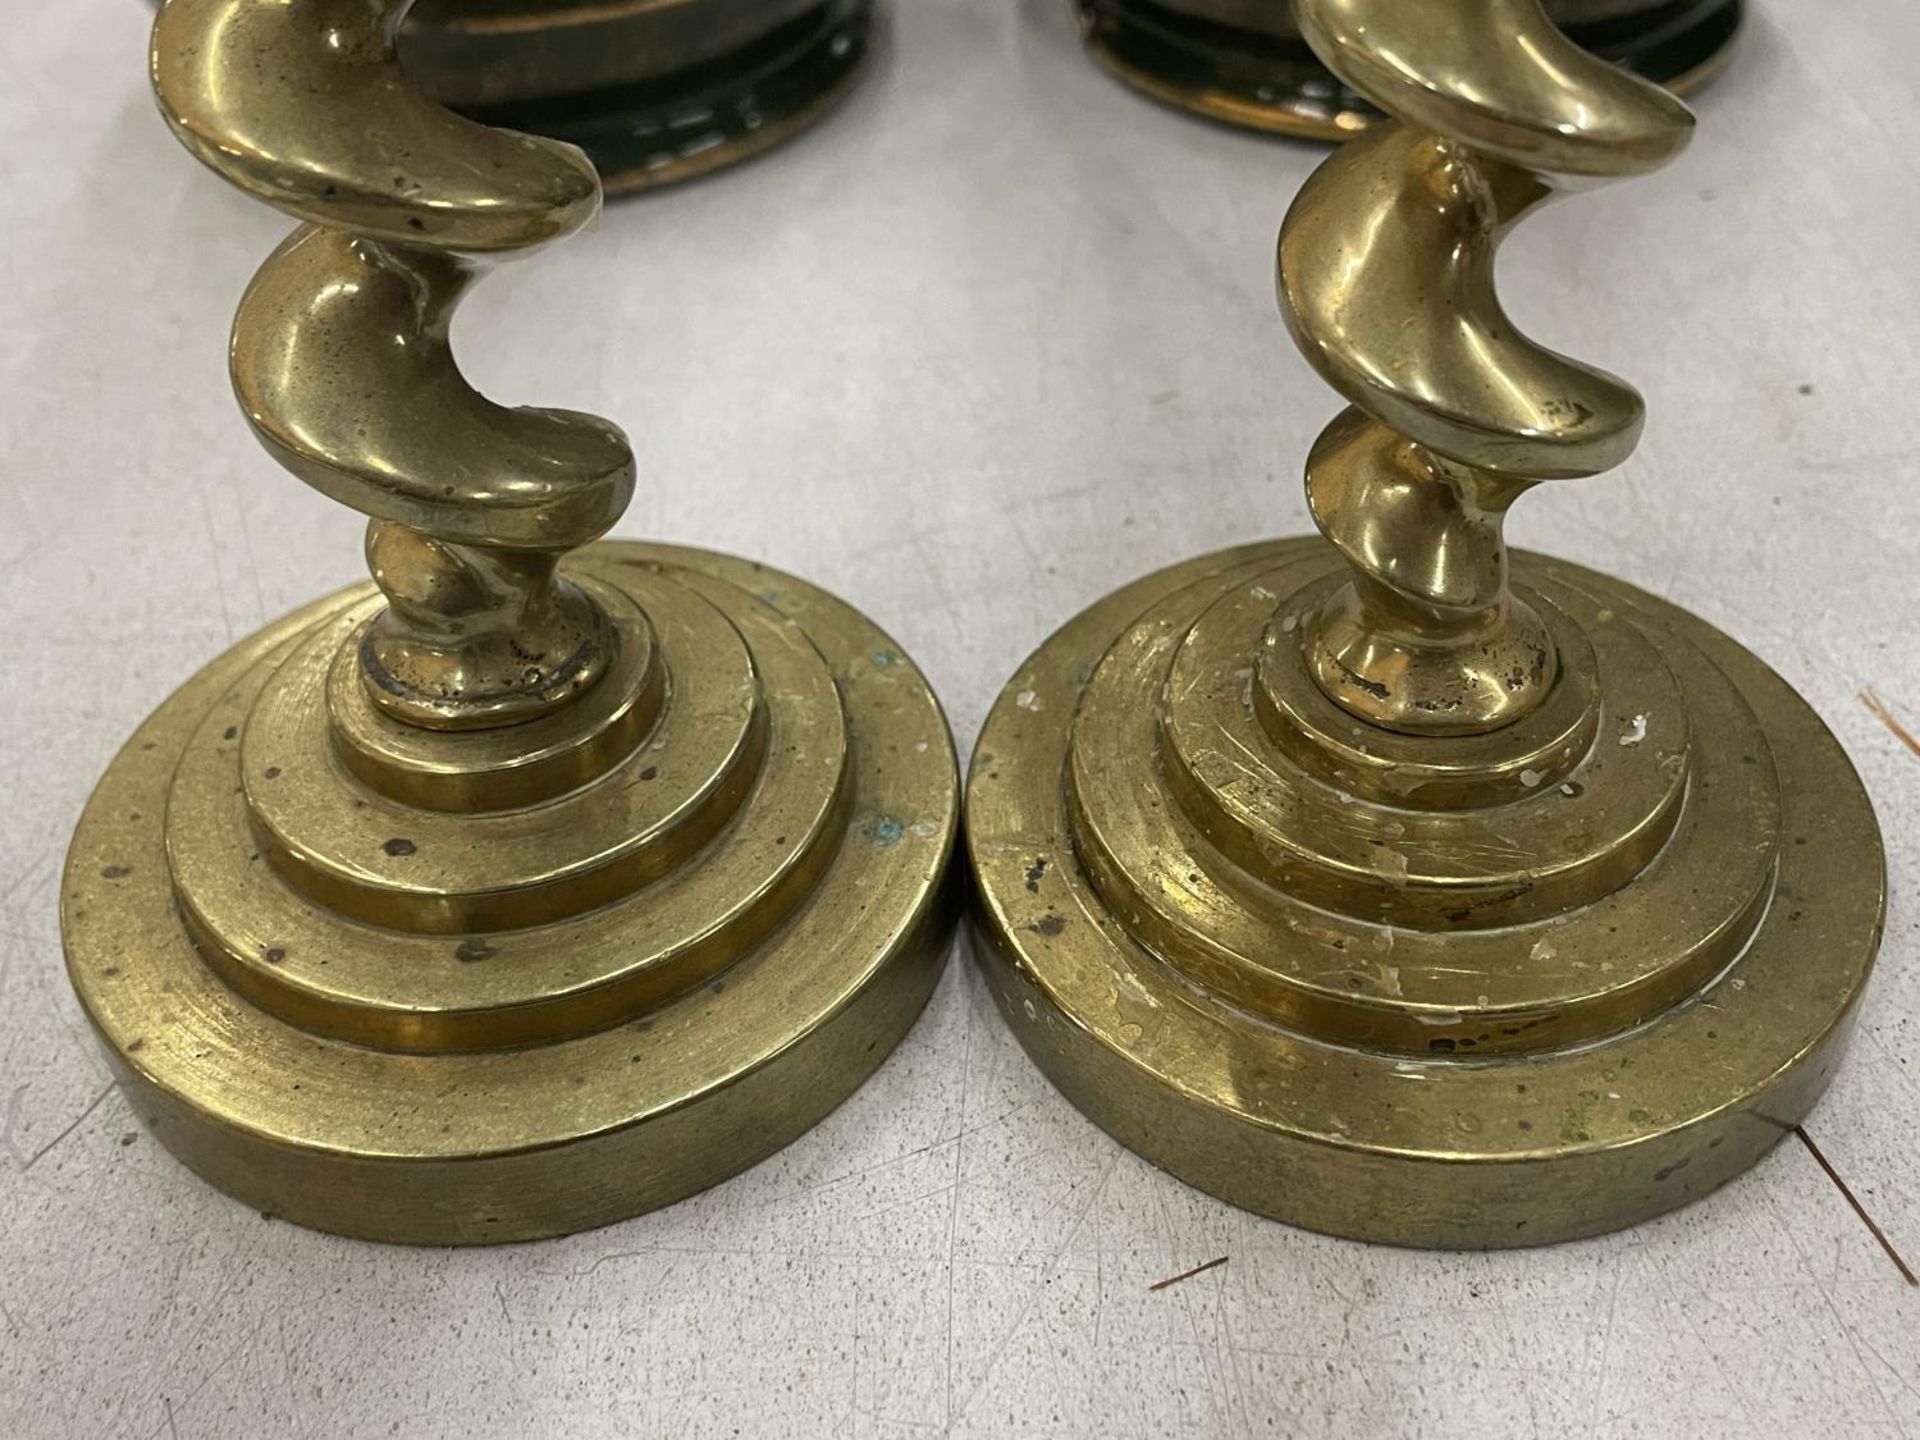 A PAIR OF HEAVY VINTAGE BRASS CANDLESTICKS WITH BARLEY TWIST STEMS, HEIGHT 23CM - Image 2 of 3